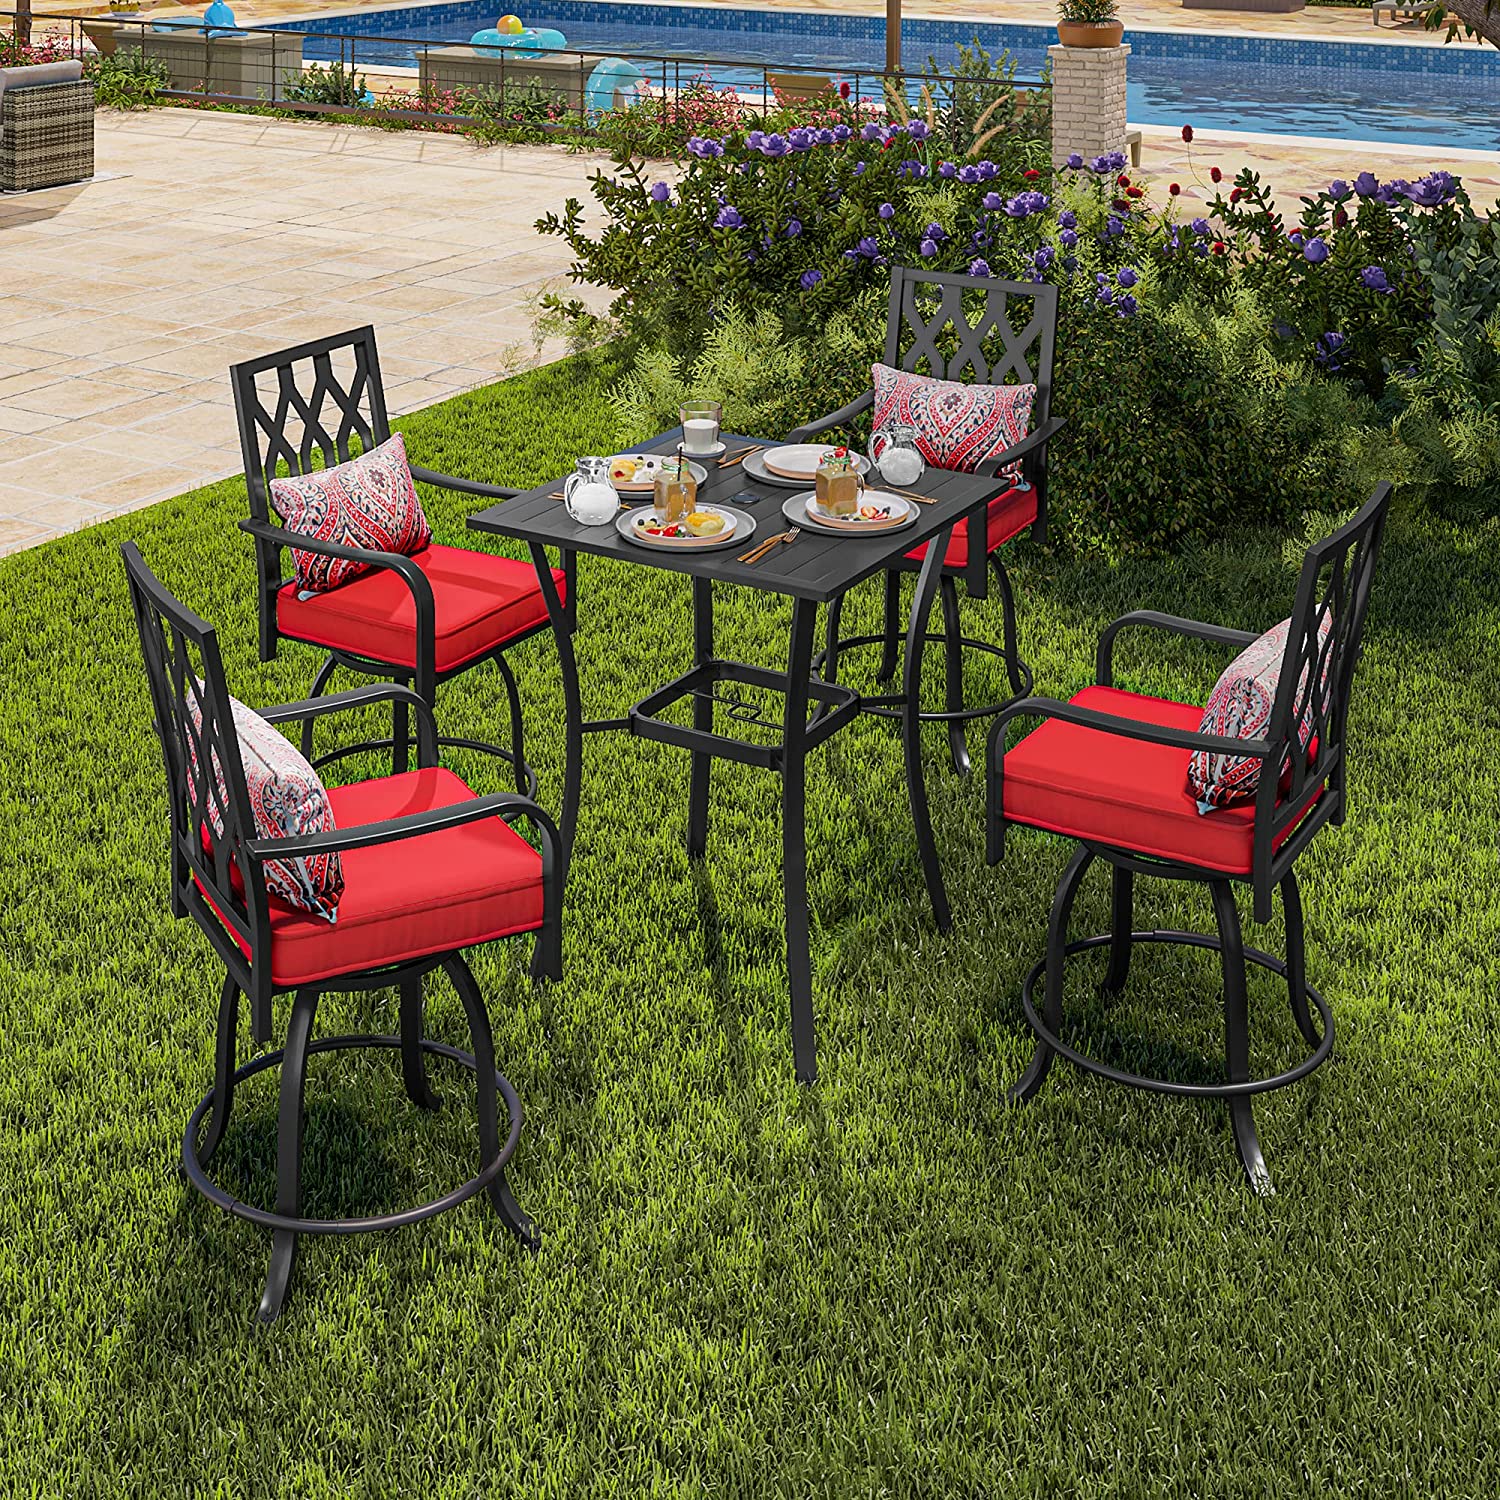 Dextrus 5-Piece Patio Swivel Bar Set, 32" Square Patio Bar Table (Umbrella Hole) and 4 Cushioned Swivel Bar Stools, Metal Patio Bar Set Ideal for Patio Lawn Garden Porch, Black - image 5 of 7